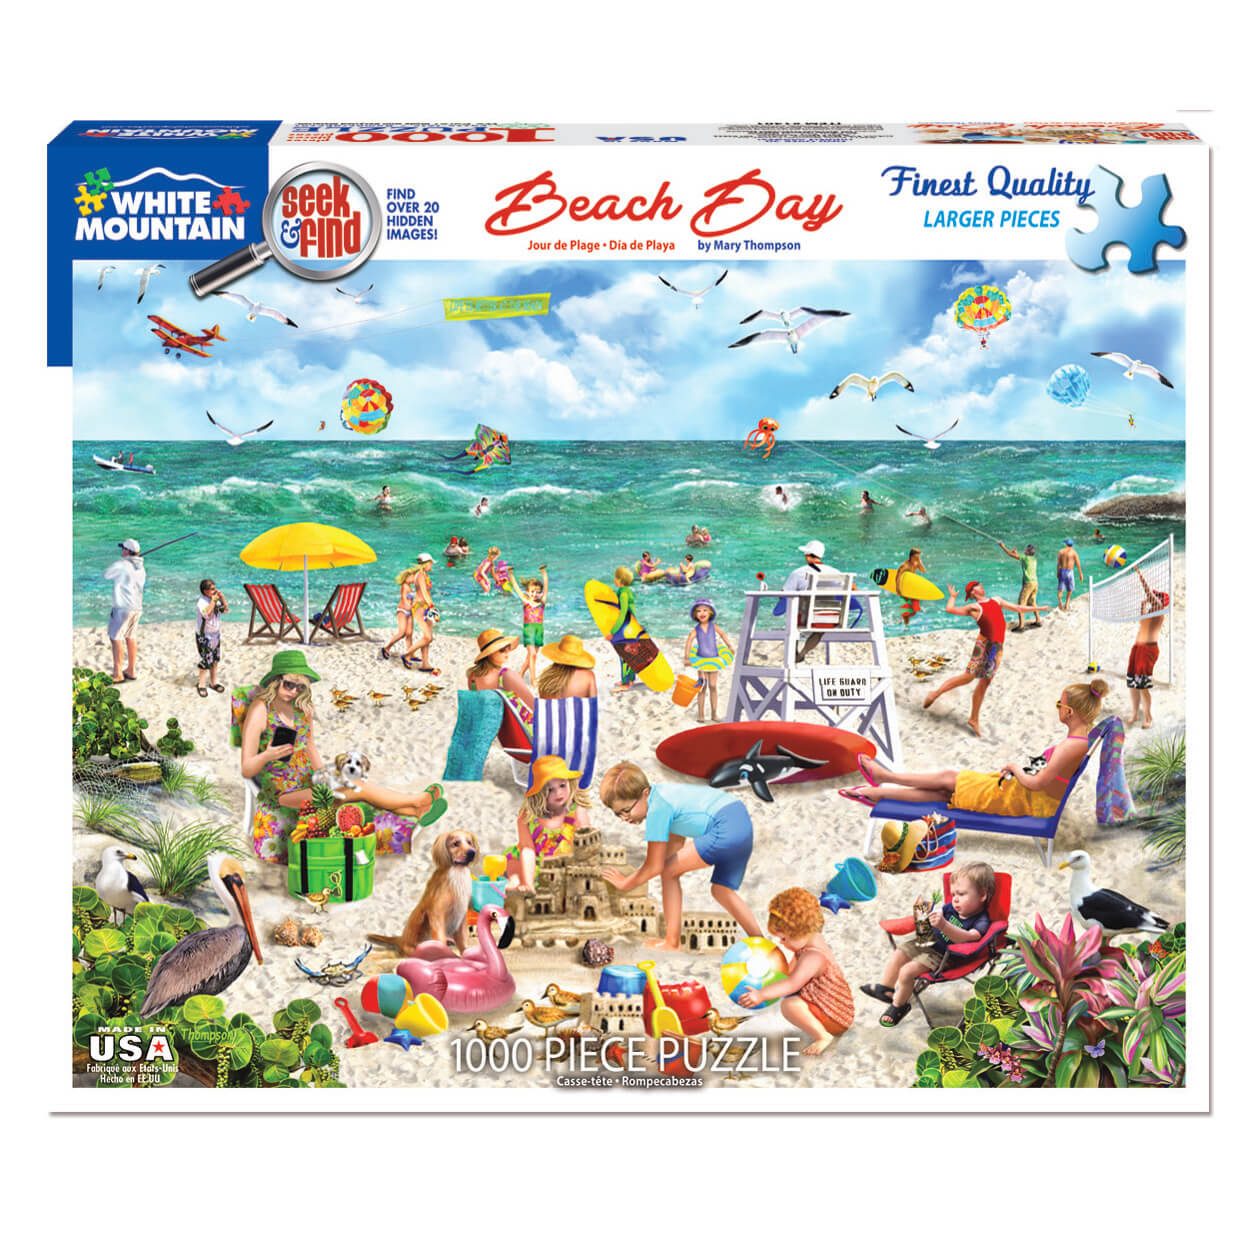 White Mountain Puzzles Beach Day Seek & Find 1000 Piece Jigsaw Puzzle